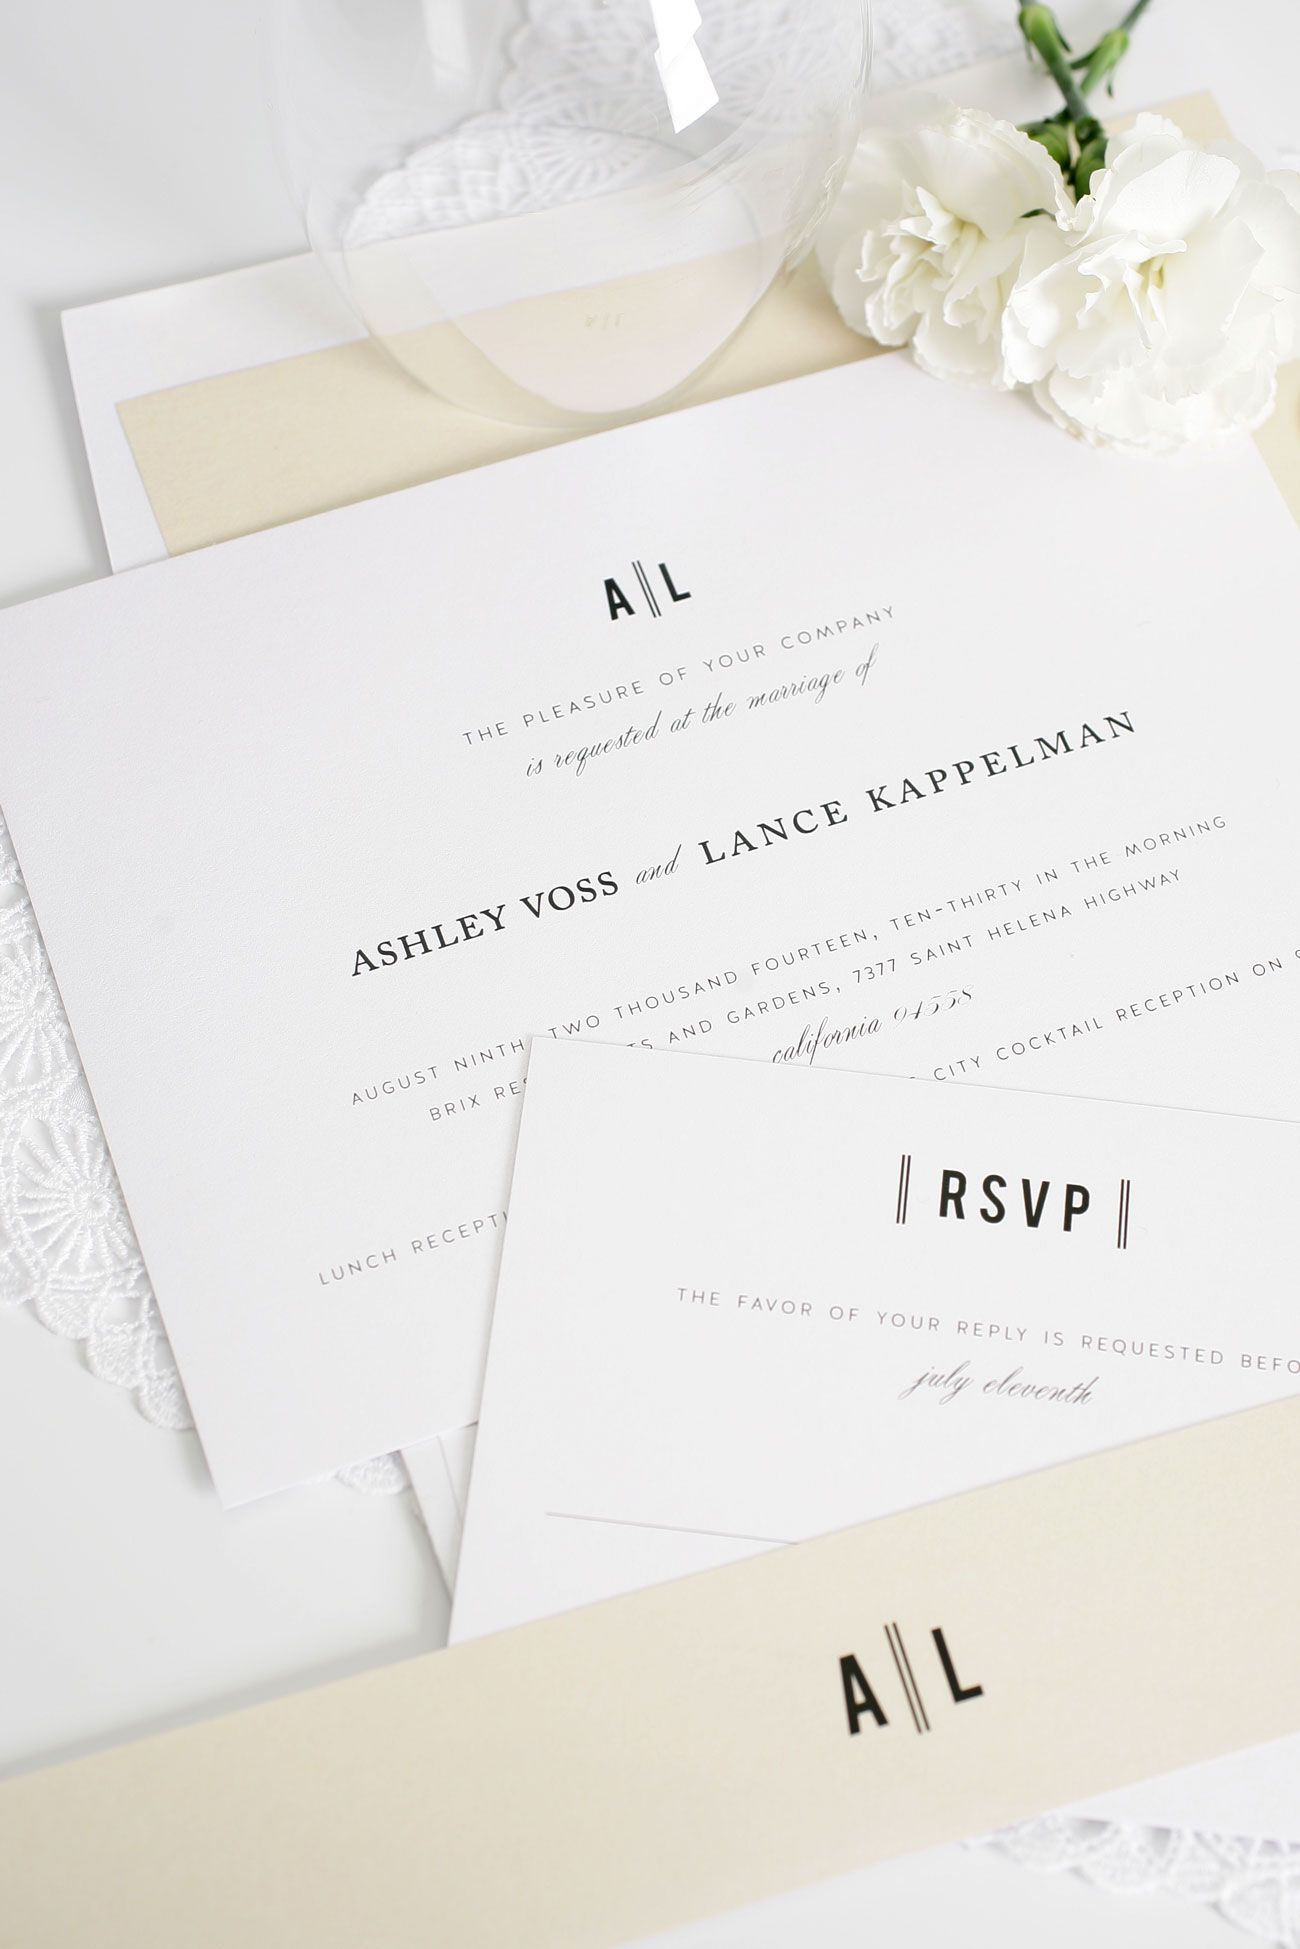 Looking for modern yet classic wedding invitations? Ask us how we can customize our Urban Vintage wedding invitations to your